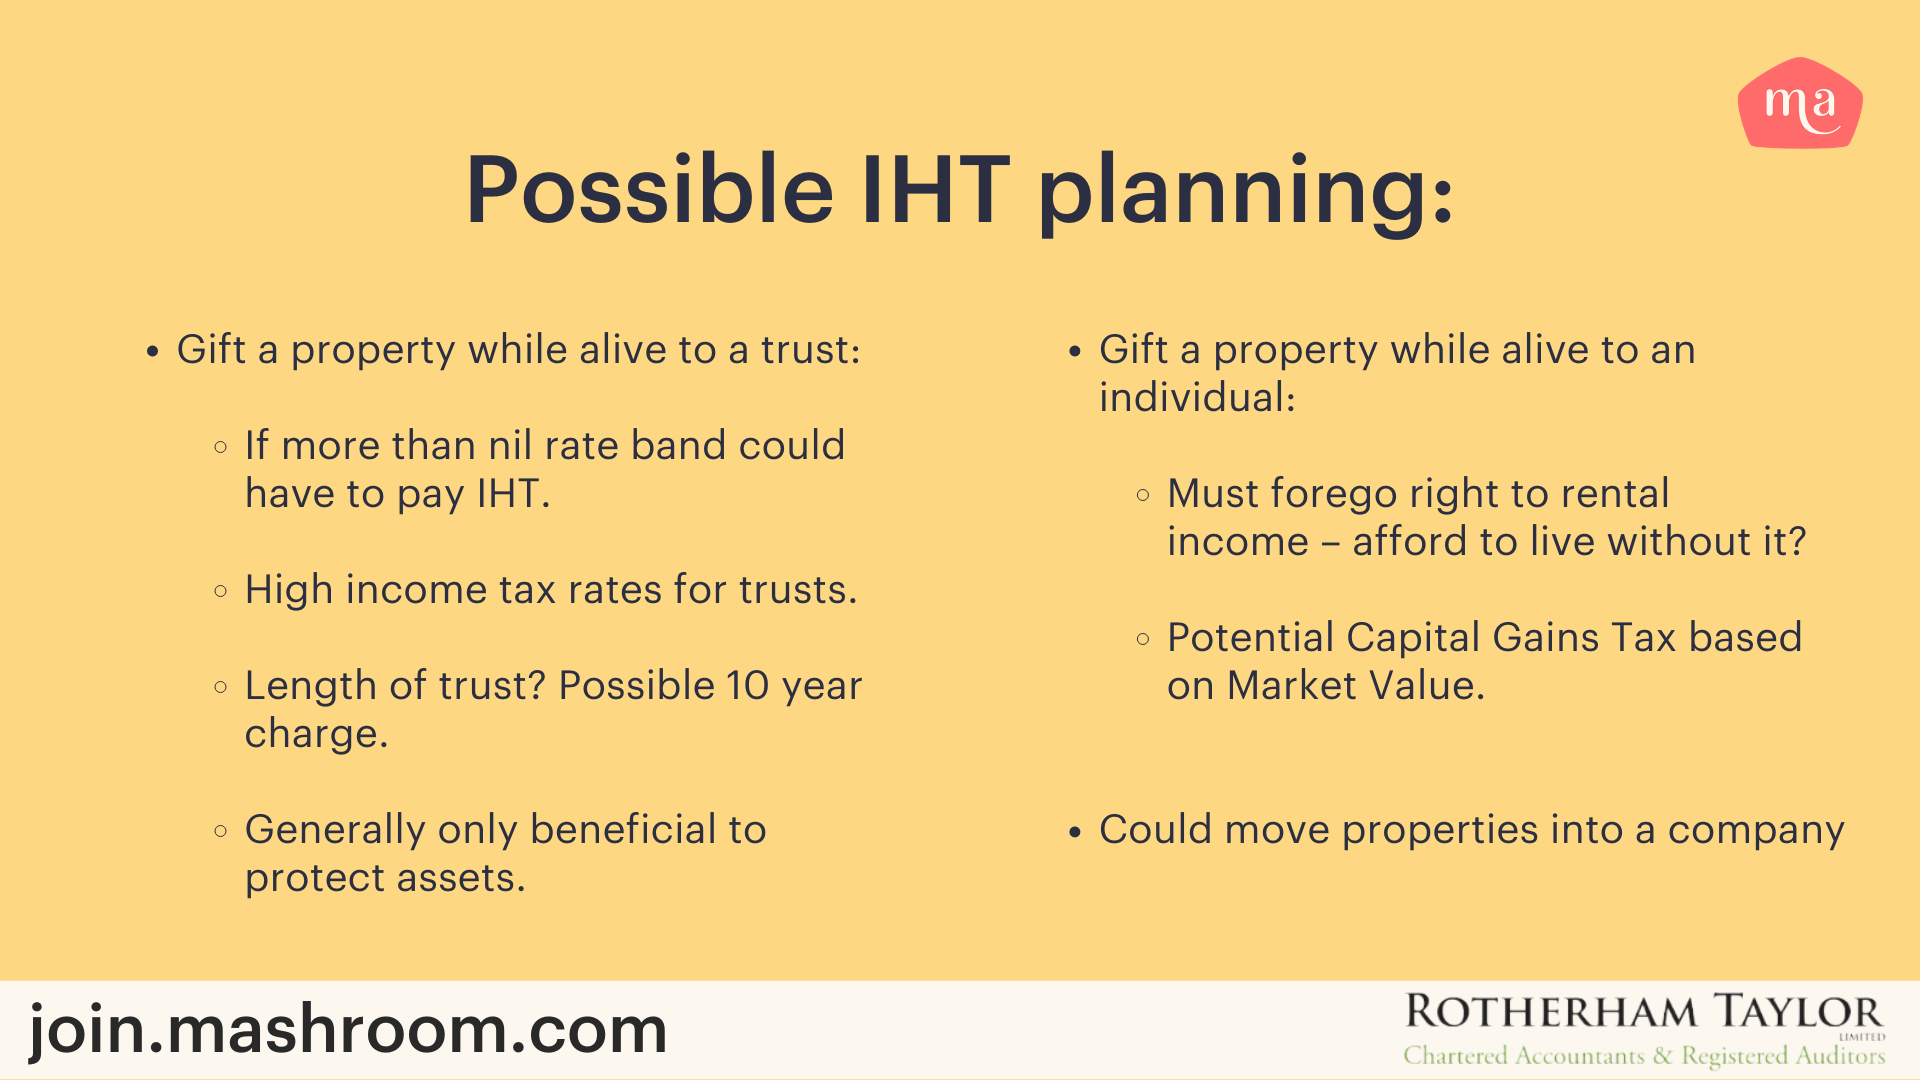 image with the text 'possible IHT planning'